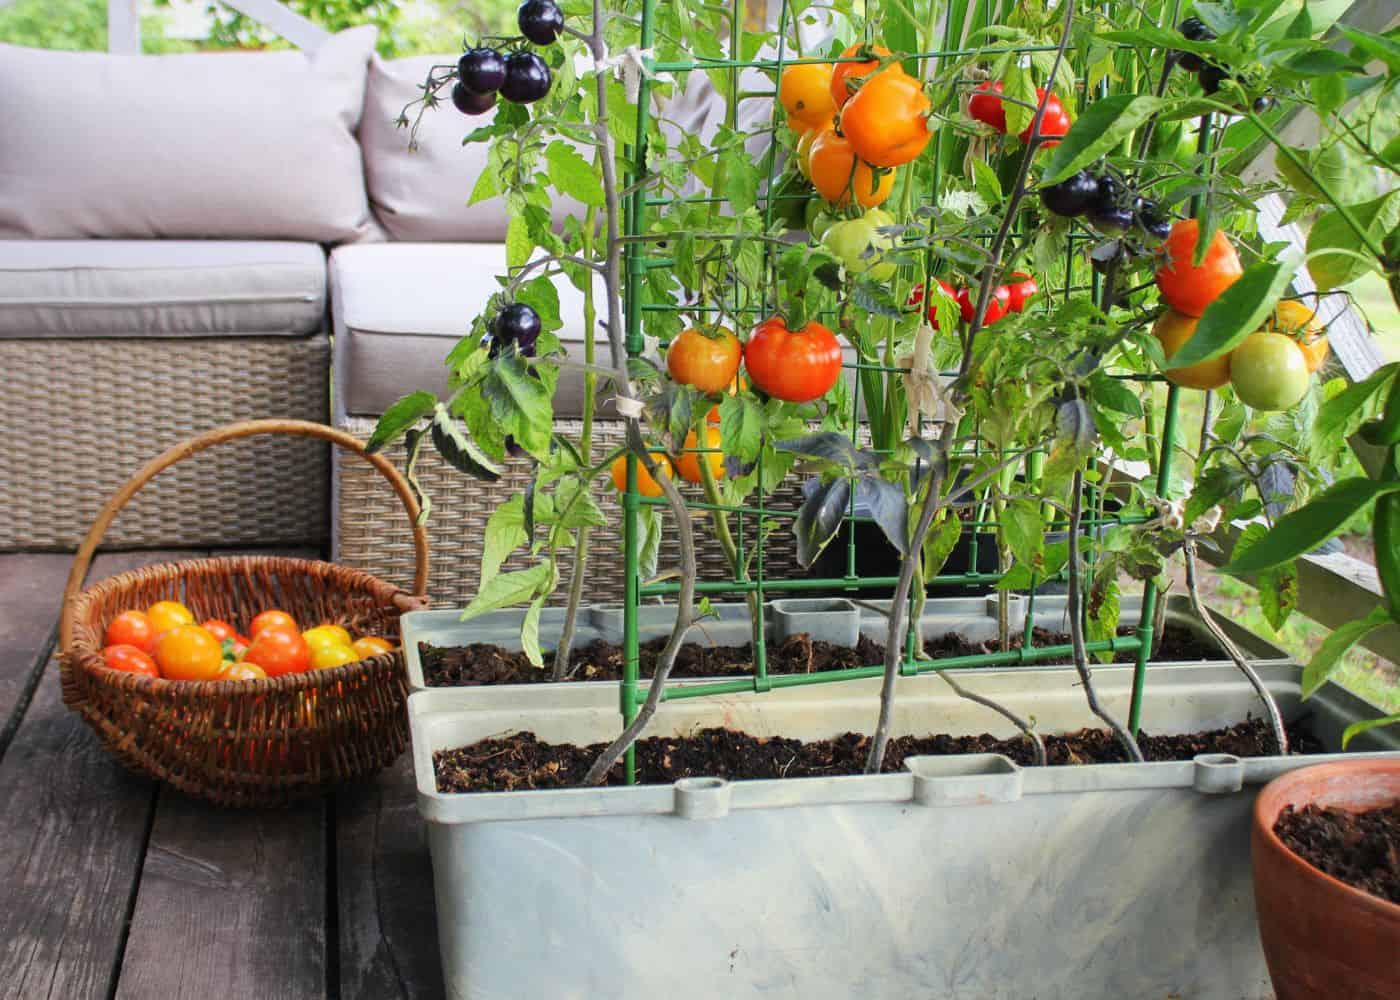 Gourmet tomatoes on the deck in planters